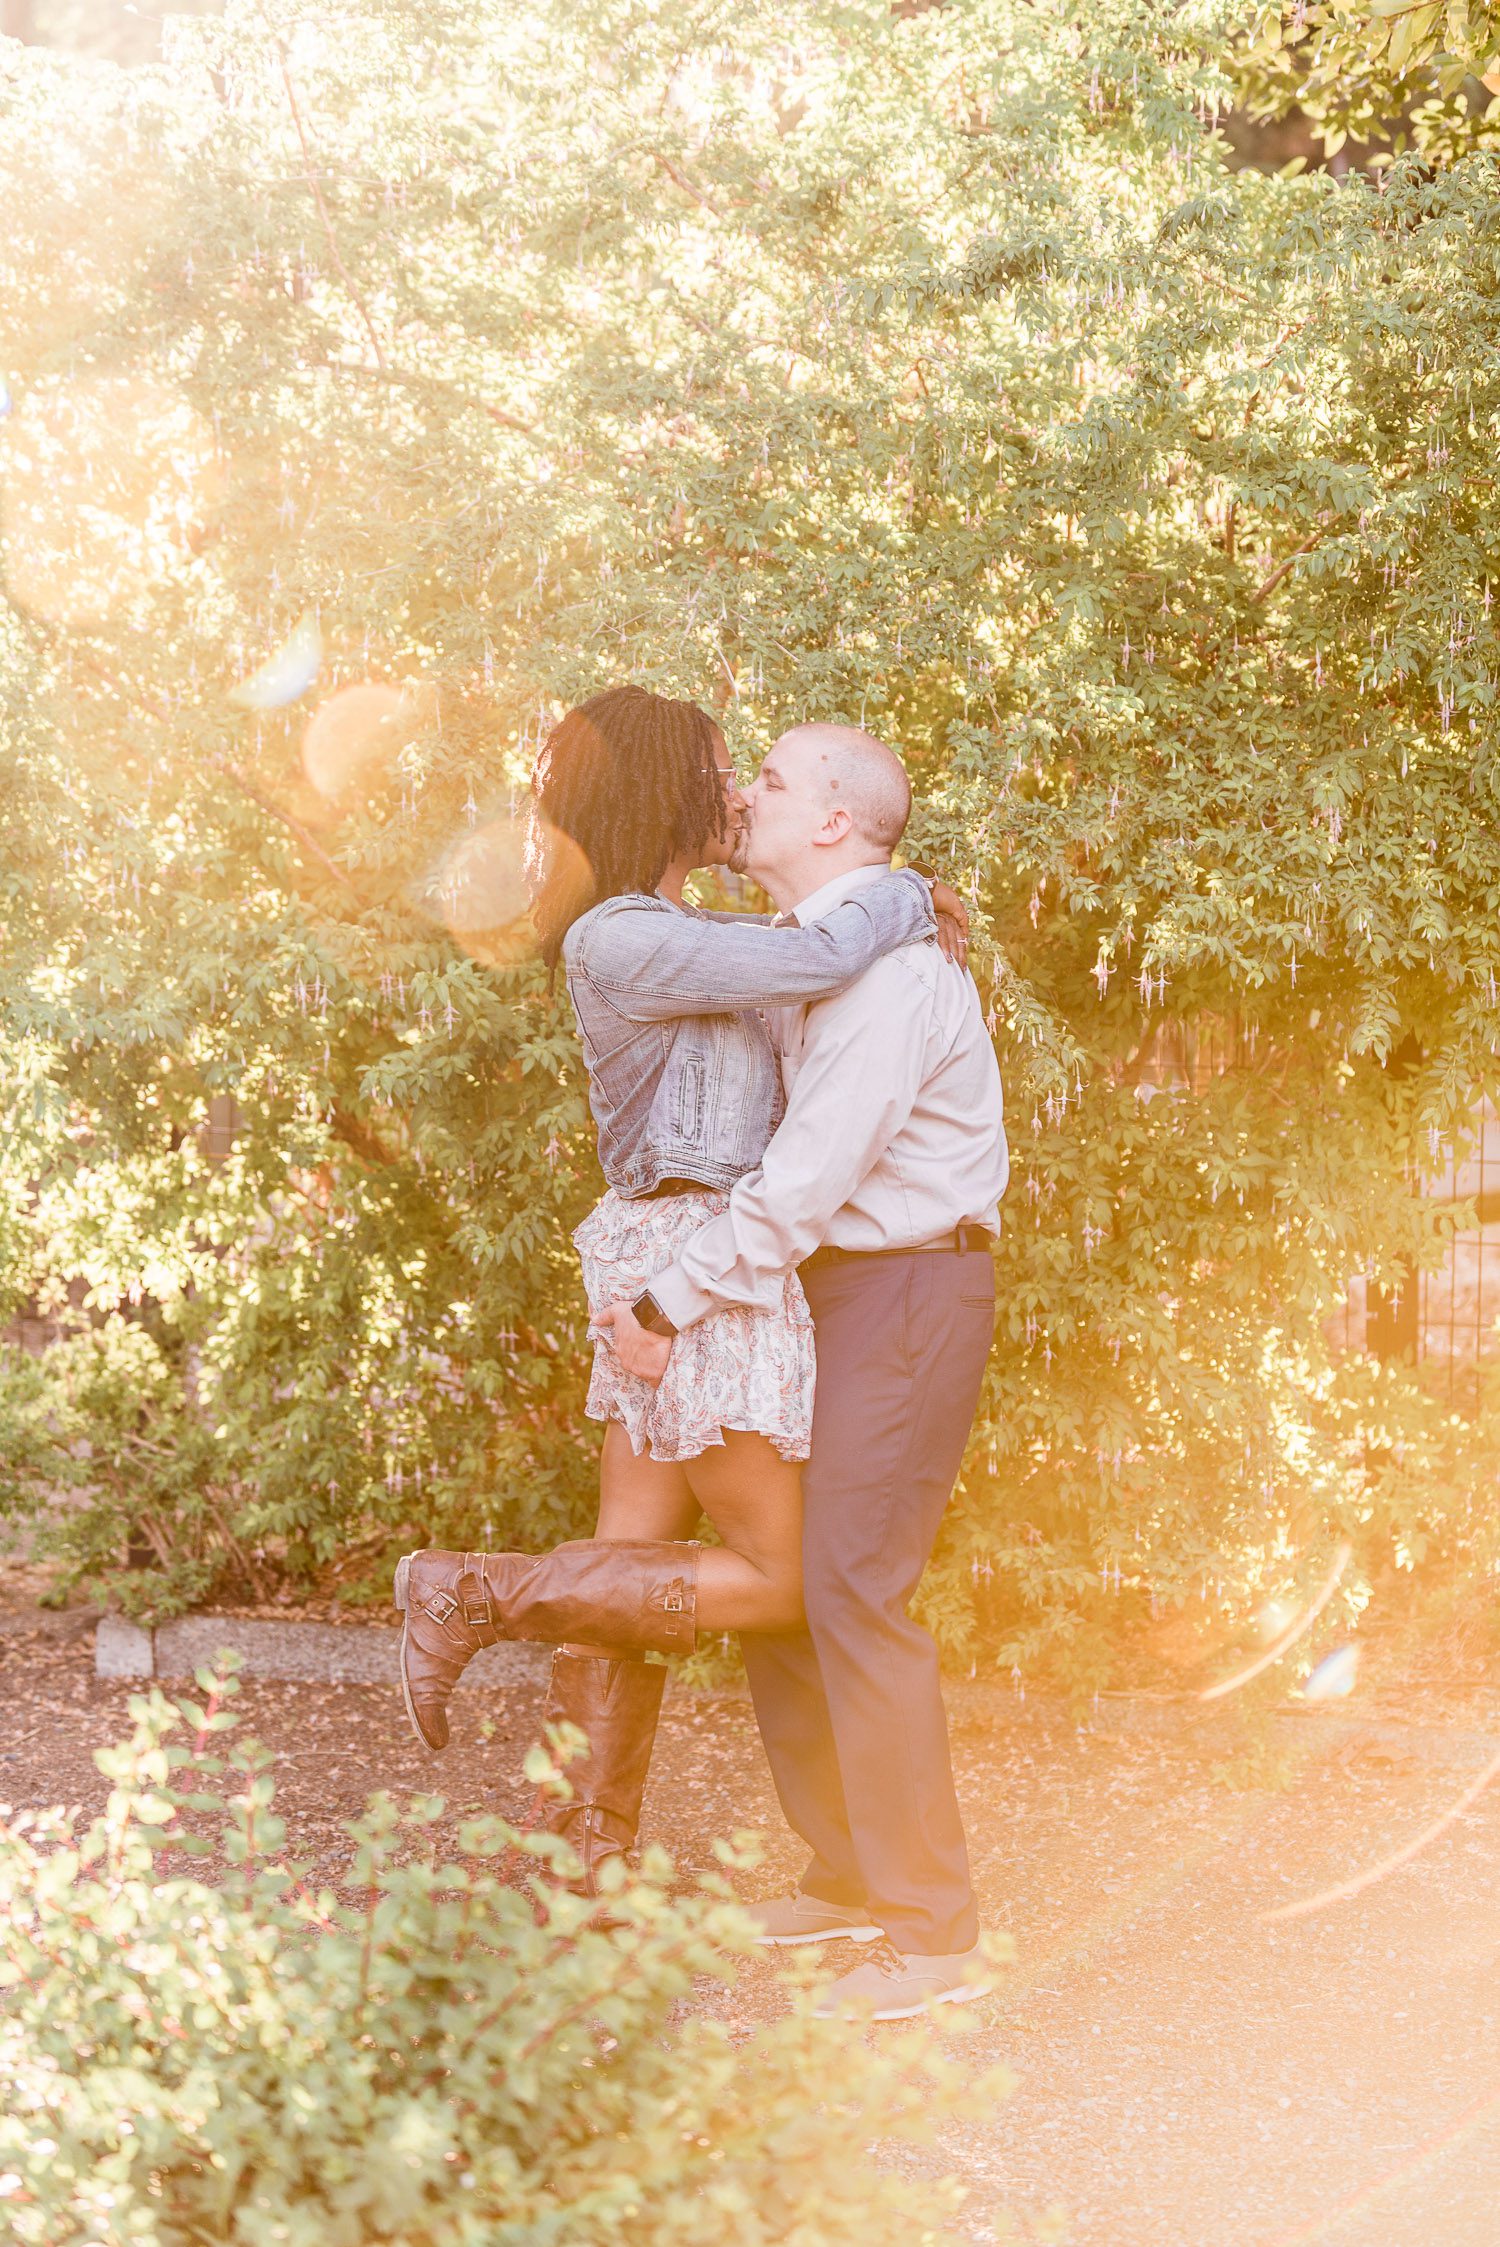 Interracial Couple kissing each other under the golden sun during their engagement session in Tacoma, Washington.